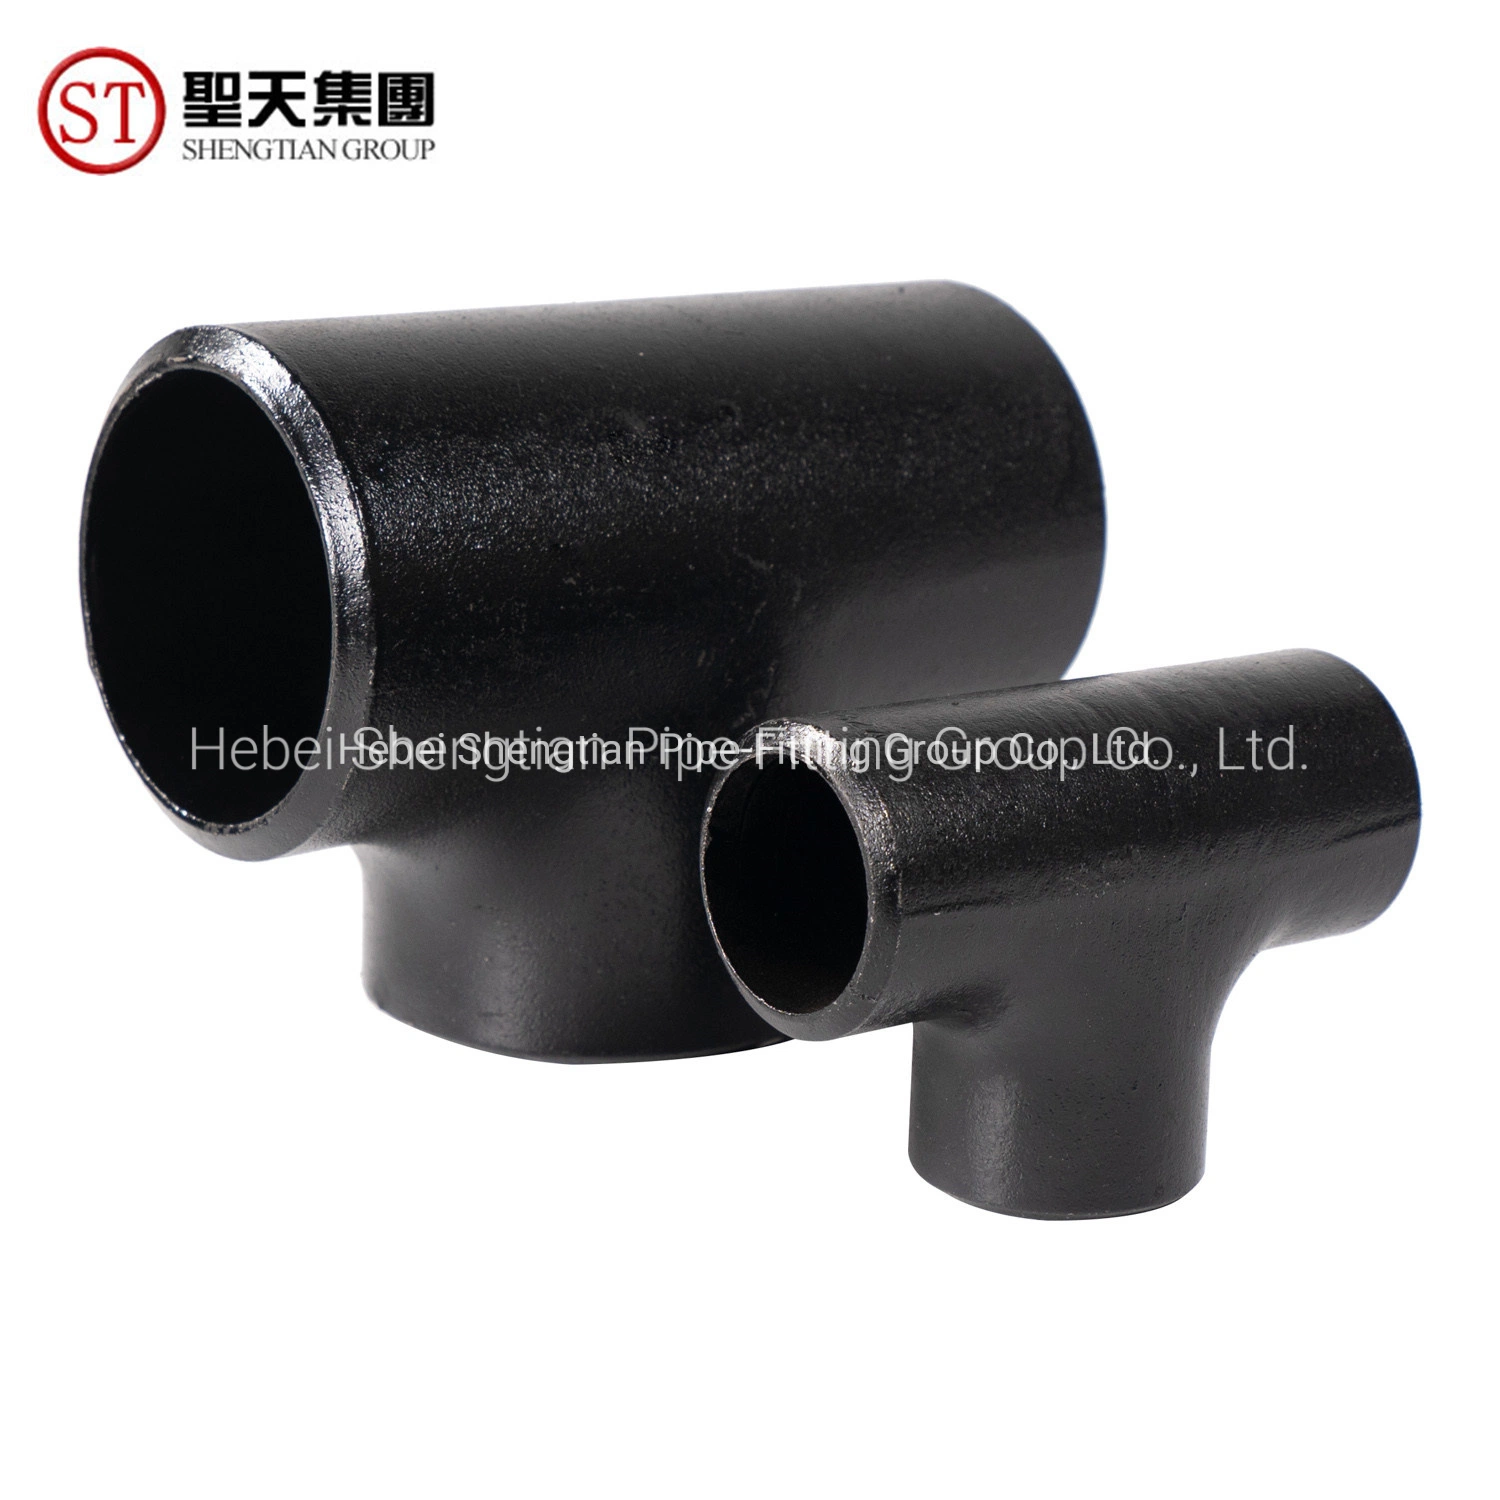 Thermofusion HDPE Equal Mild ASME B16.9 Wpb Reducing Seamless Forged Carbon Steel Butt-Welding Pipe Fitting Straight Reducer Tee